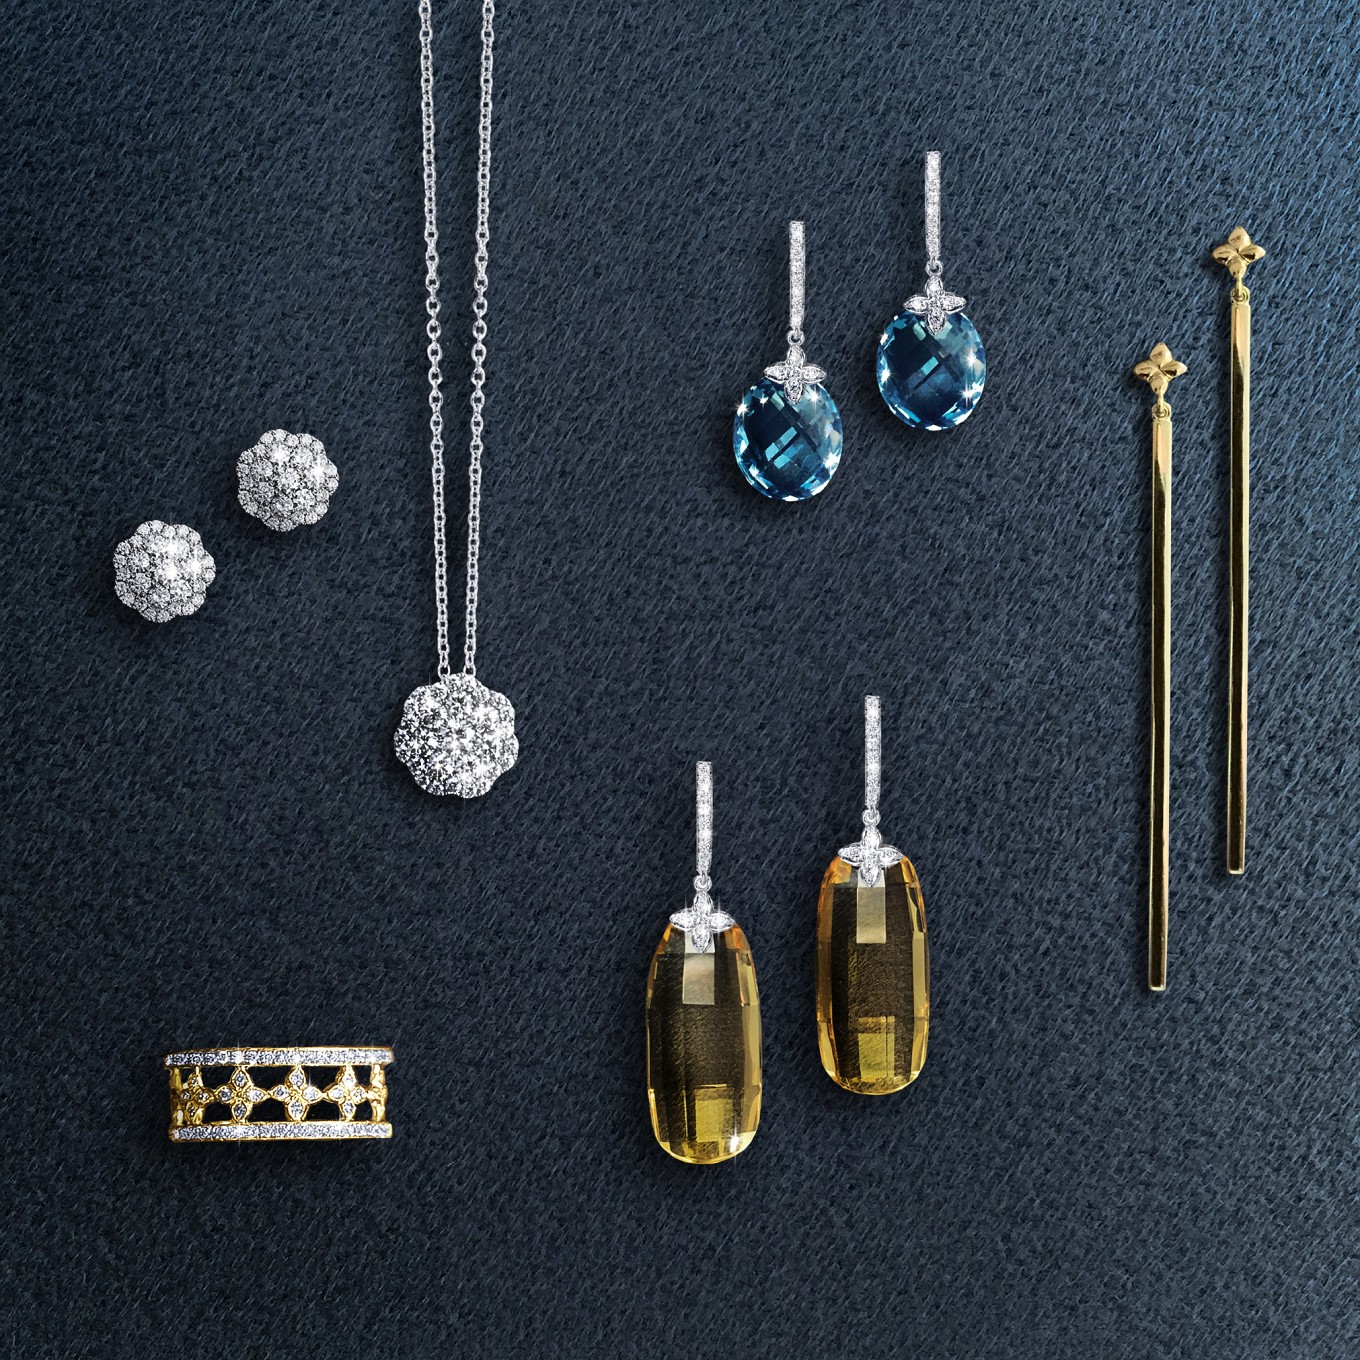 From left<br/><br/>Sevilla diamond eternity band in yellow gold<br/><br/>Cluster diamond earrings<br/><br/>Cluster diamond pendant<br/><br/>Barrel shaped checkerboard Citrine & sevilla Diamond earrings<br/><br/>Oval checkerboard blue topaz sevilla Diamond drop earrings<br/><br/>G series "2.1" earrings in yellow gold